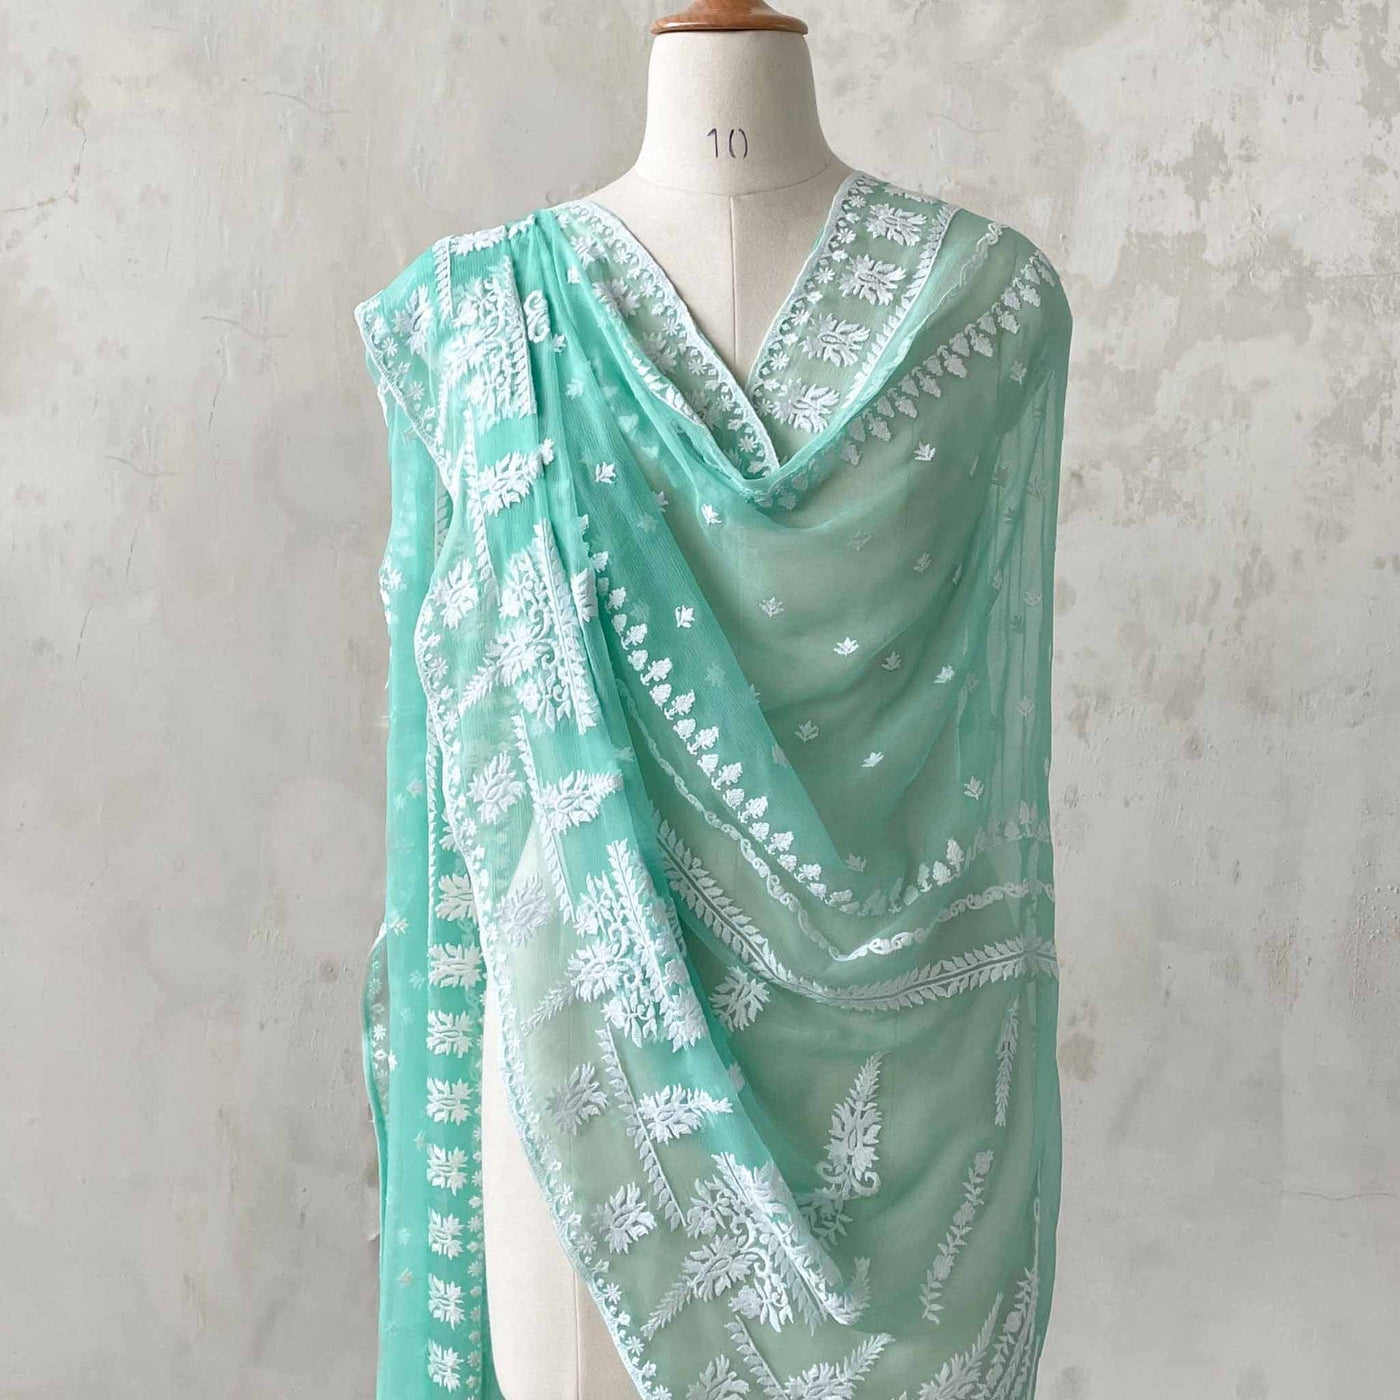 Fabric Pandit Dupatta Turquoise Floral Embroidered Pure Chiffon Dupatta (2.30 meters)